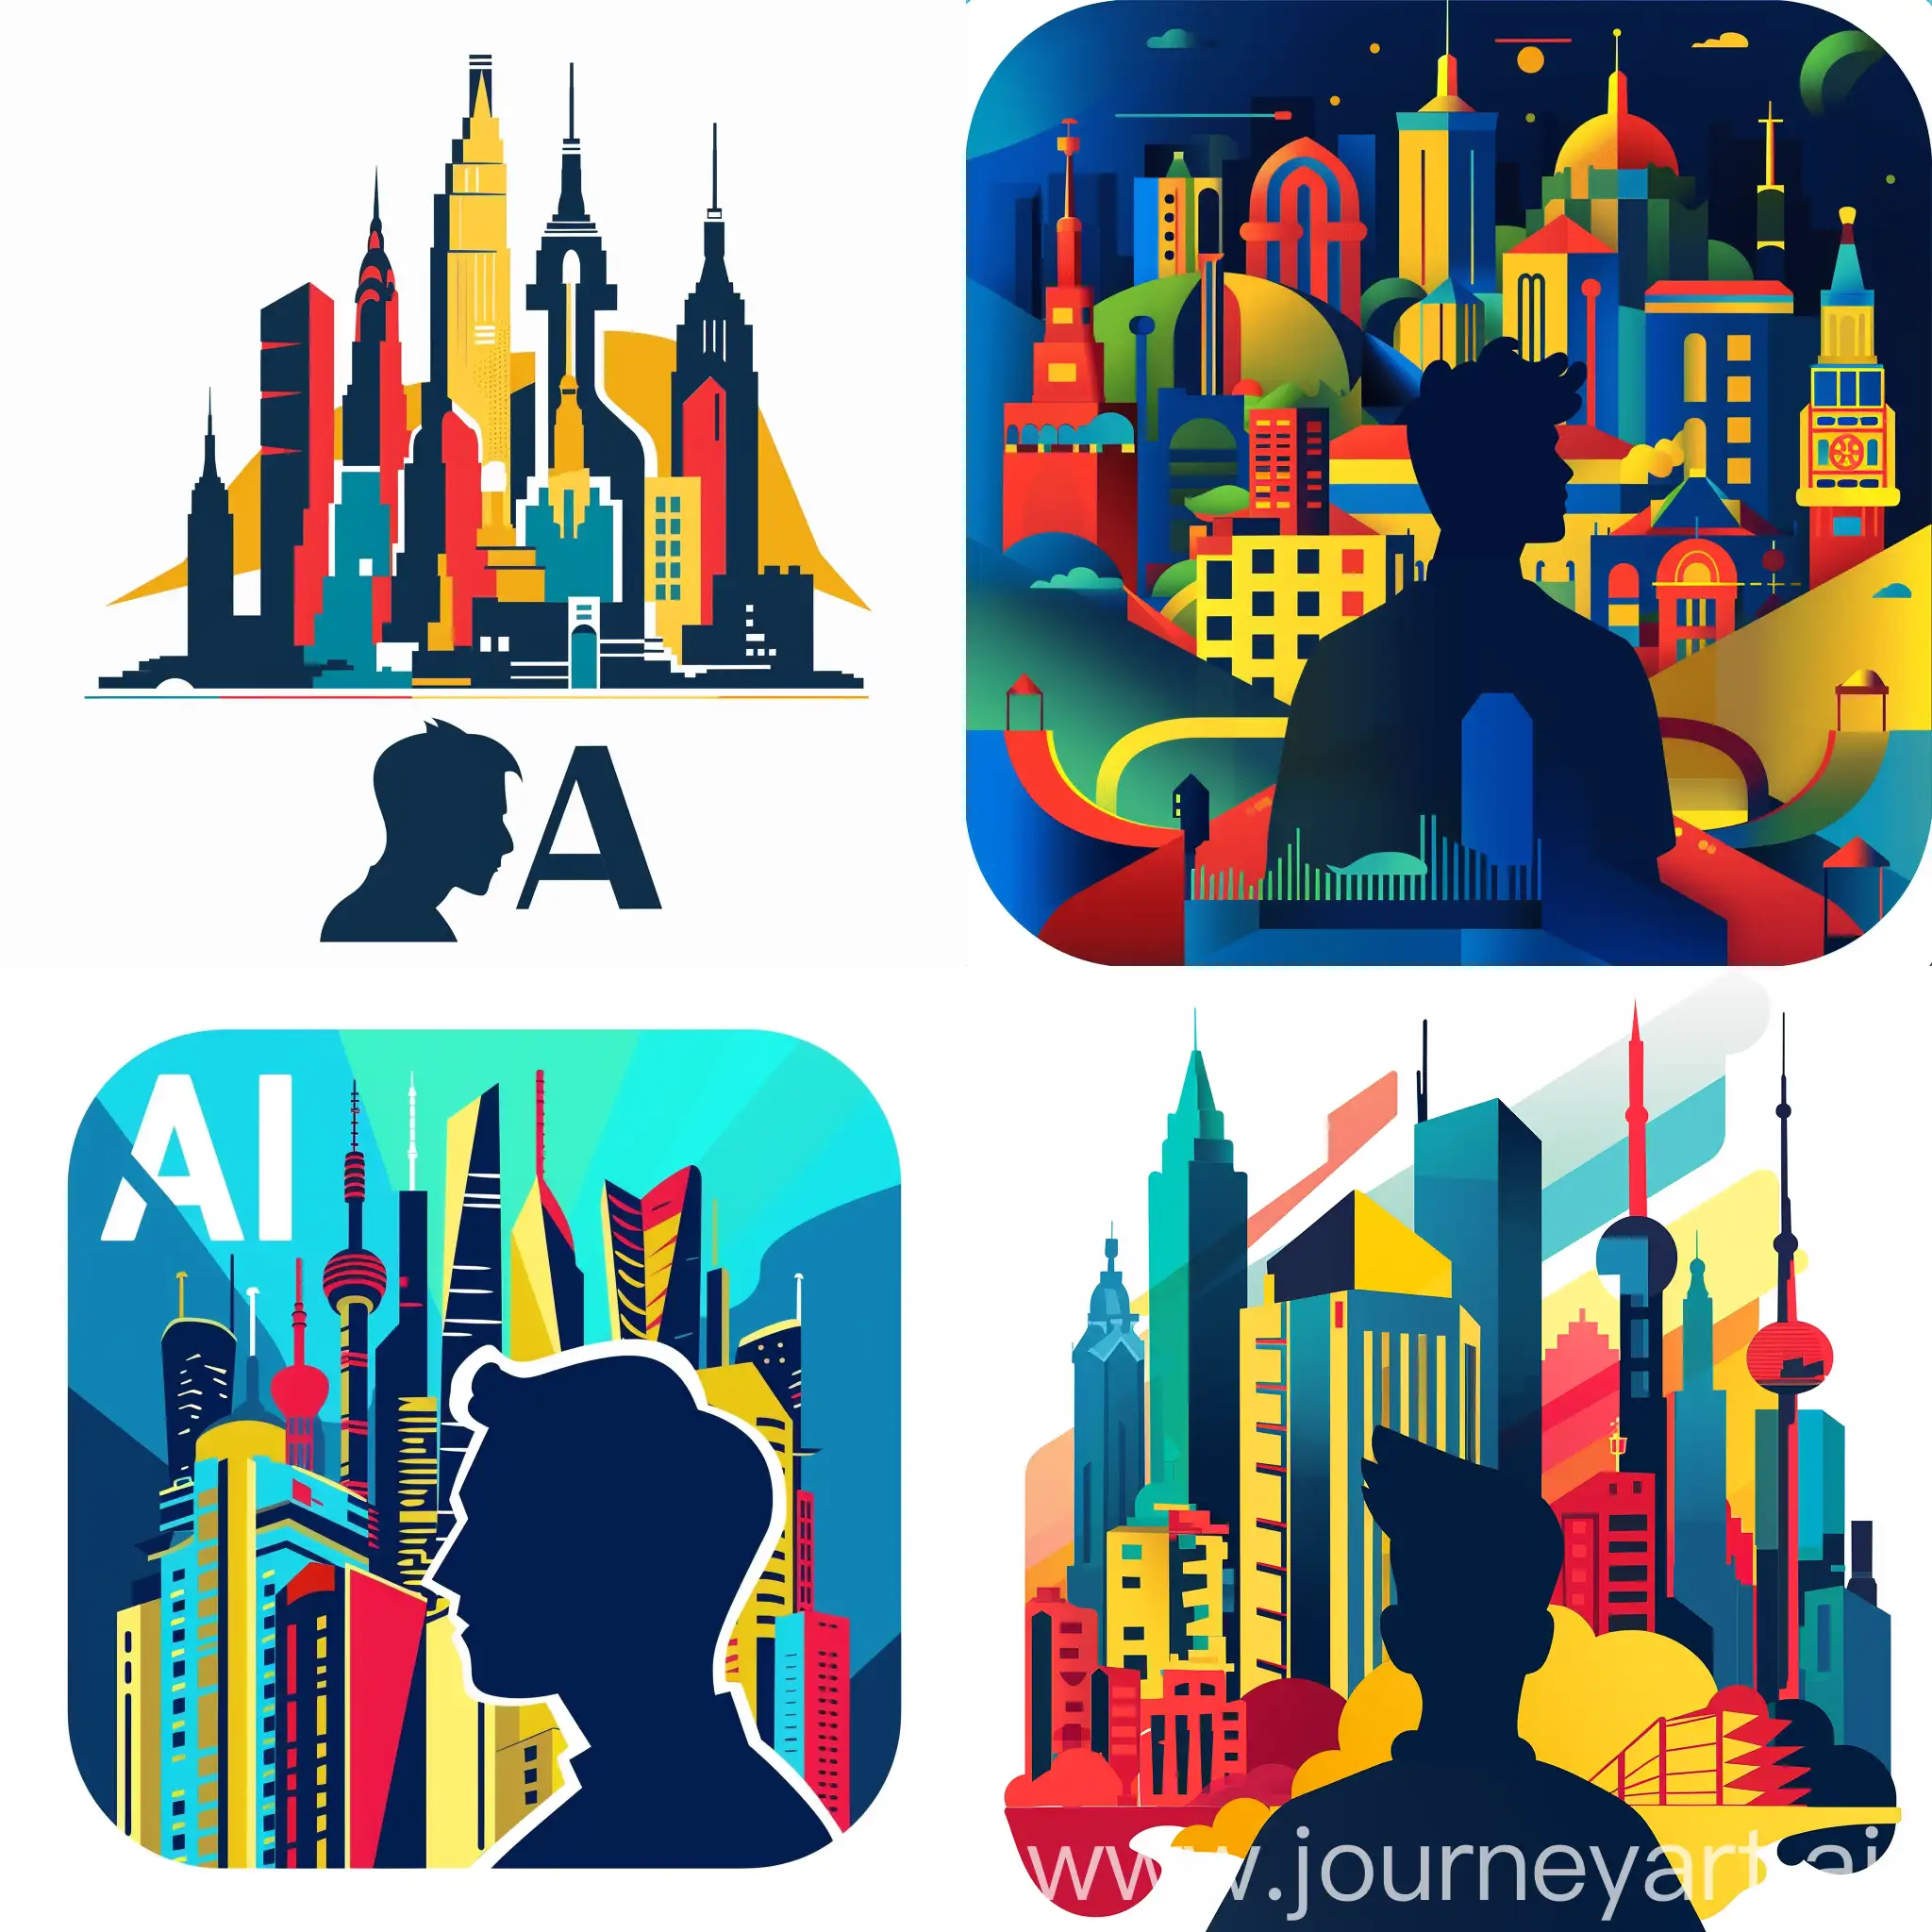 Design a vibrant and captivating logo for the AI Touristic Explorer for Cities mobile application. The logo should prominently feature elements that represent a city, such as iconic buildings, landmarks, or a skyline. Additionally, include the silhouette of a person (a male tourist) observing the cityscape, ensuring the figure is in shadow and not distinctly visible, so the emphasis remains on the city itself. The color scheme should be lively, with a particular focus on blue, red, yellow, and green to evoke a sense of adventure and exploration. The main highlight of the logo should be the dynamic and diverse aspects of urban environments, creating an inviting and exciting visual identity for the application.